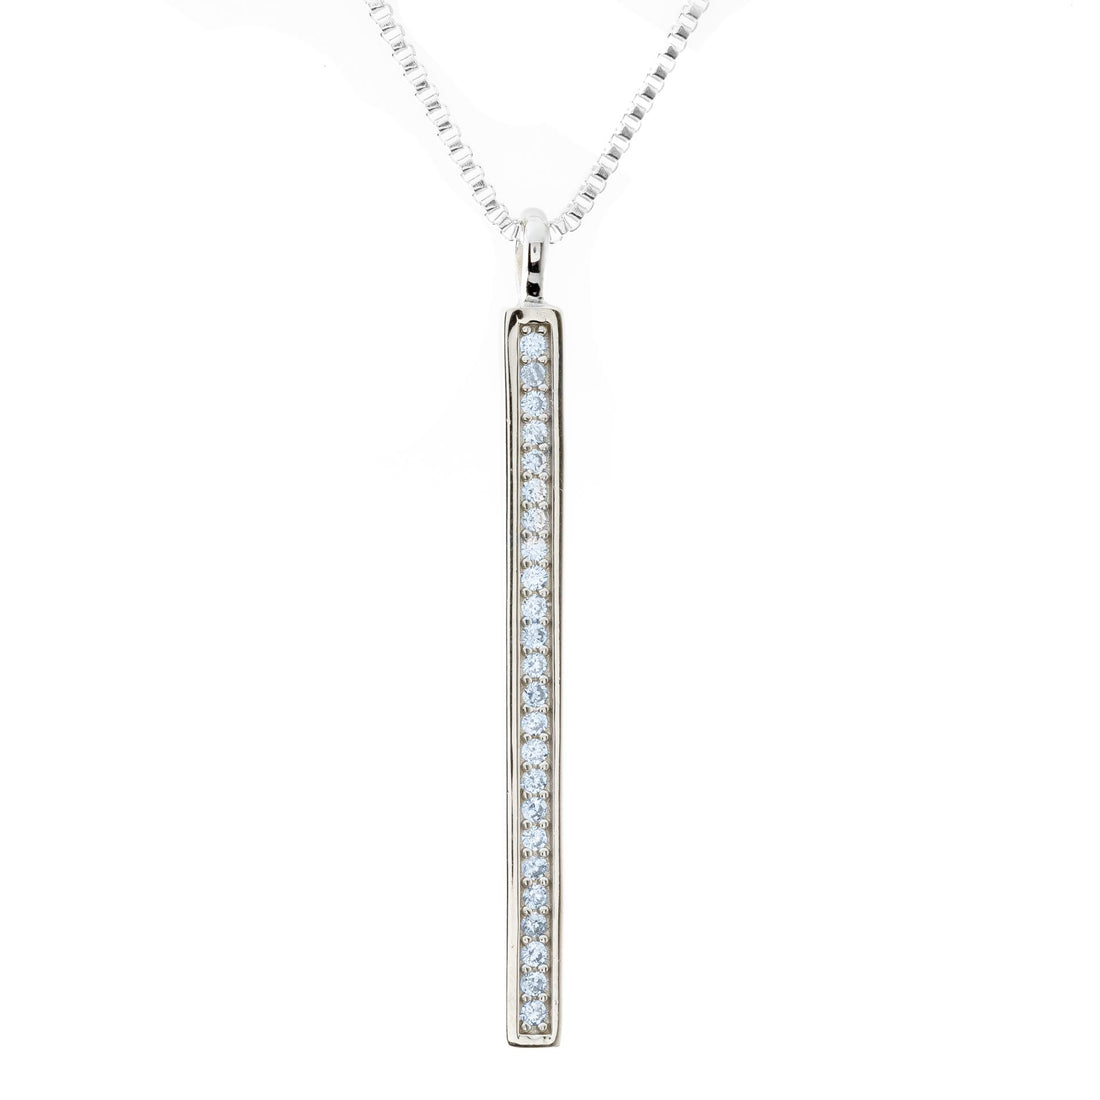 Solid Bar Clear Rhinestone Sterling Silver Pendant With Triple Rhodium Coating (2 1/2 inch Long) Default